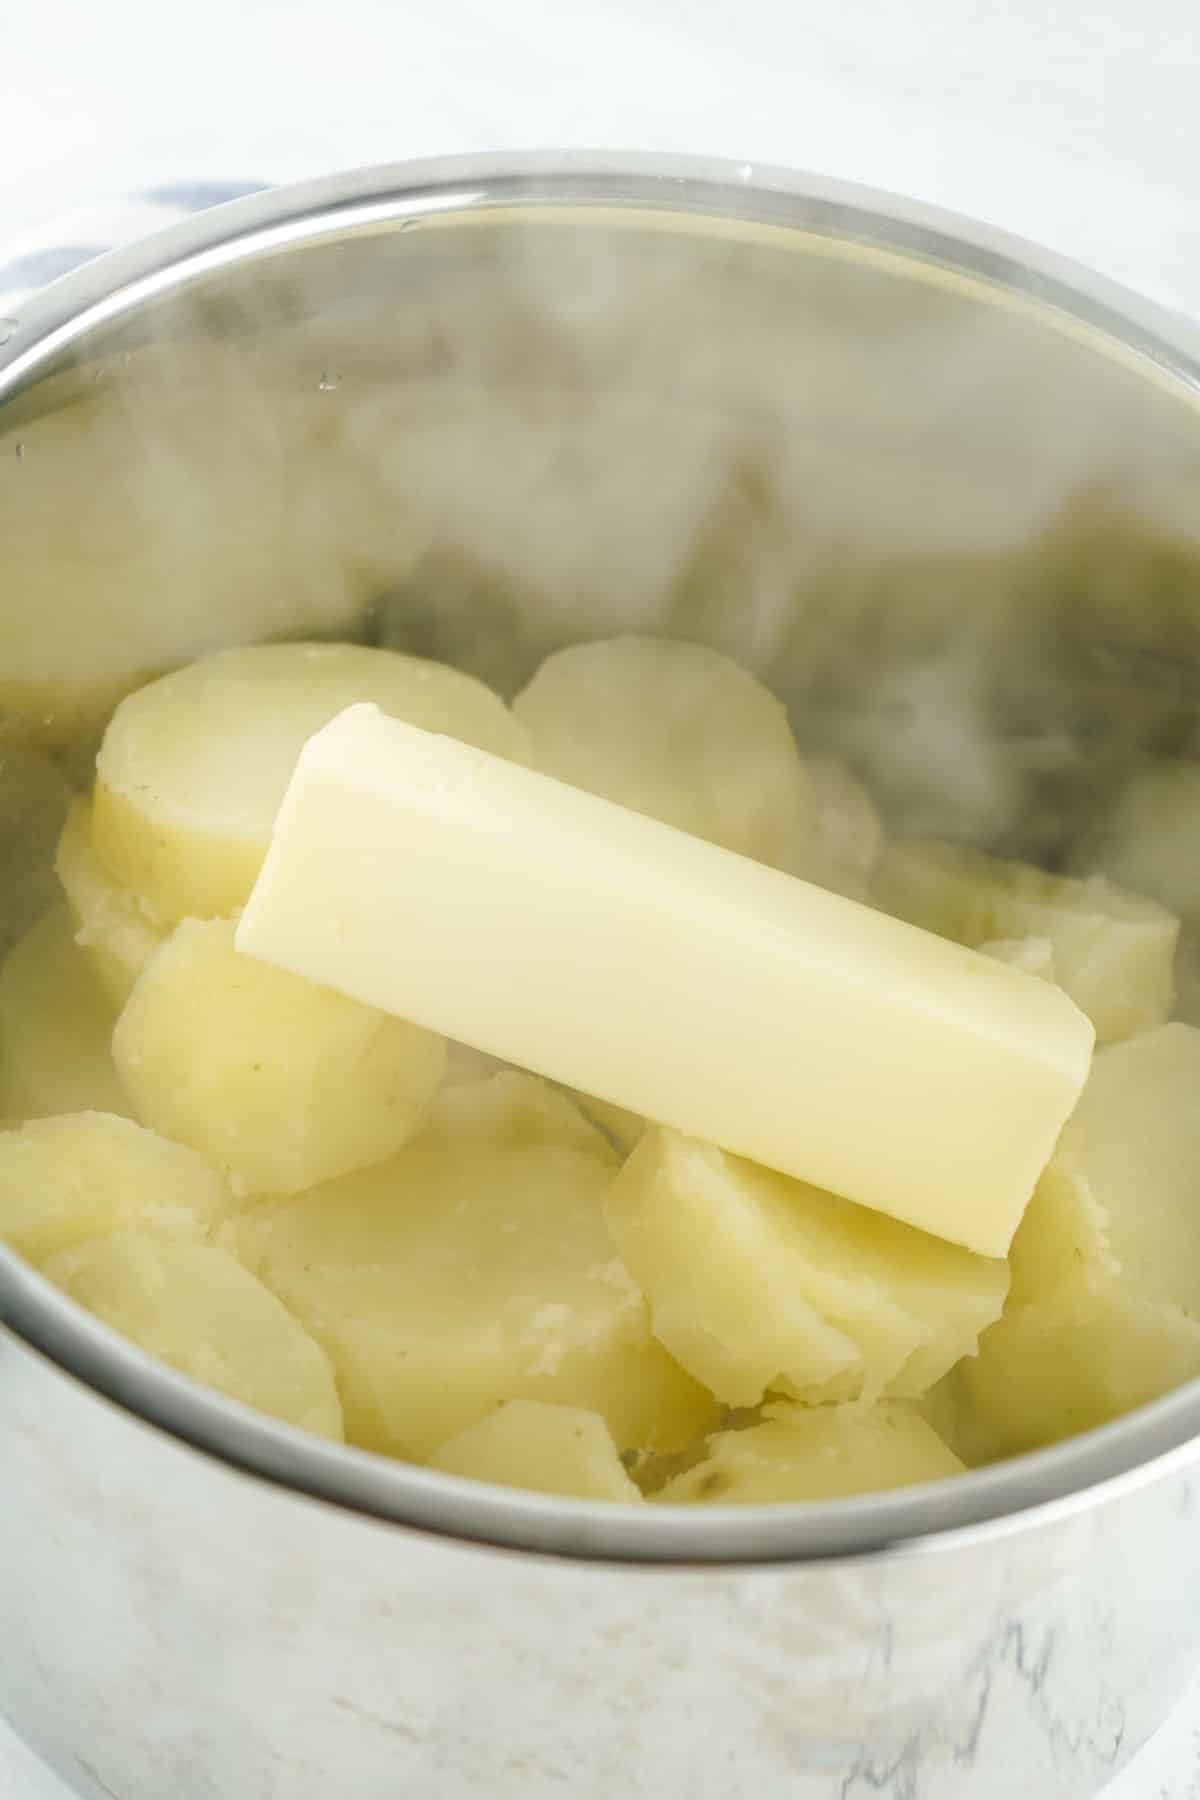 butter added to the hot, cooked potatoes.